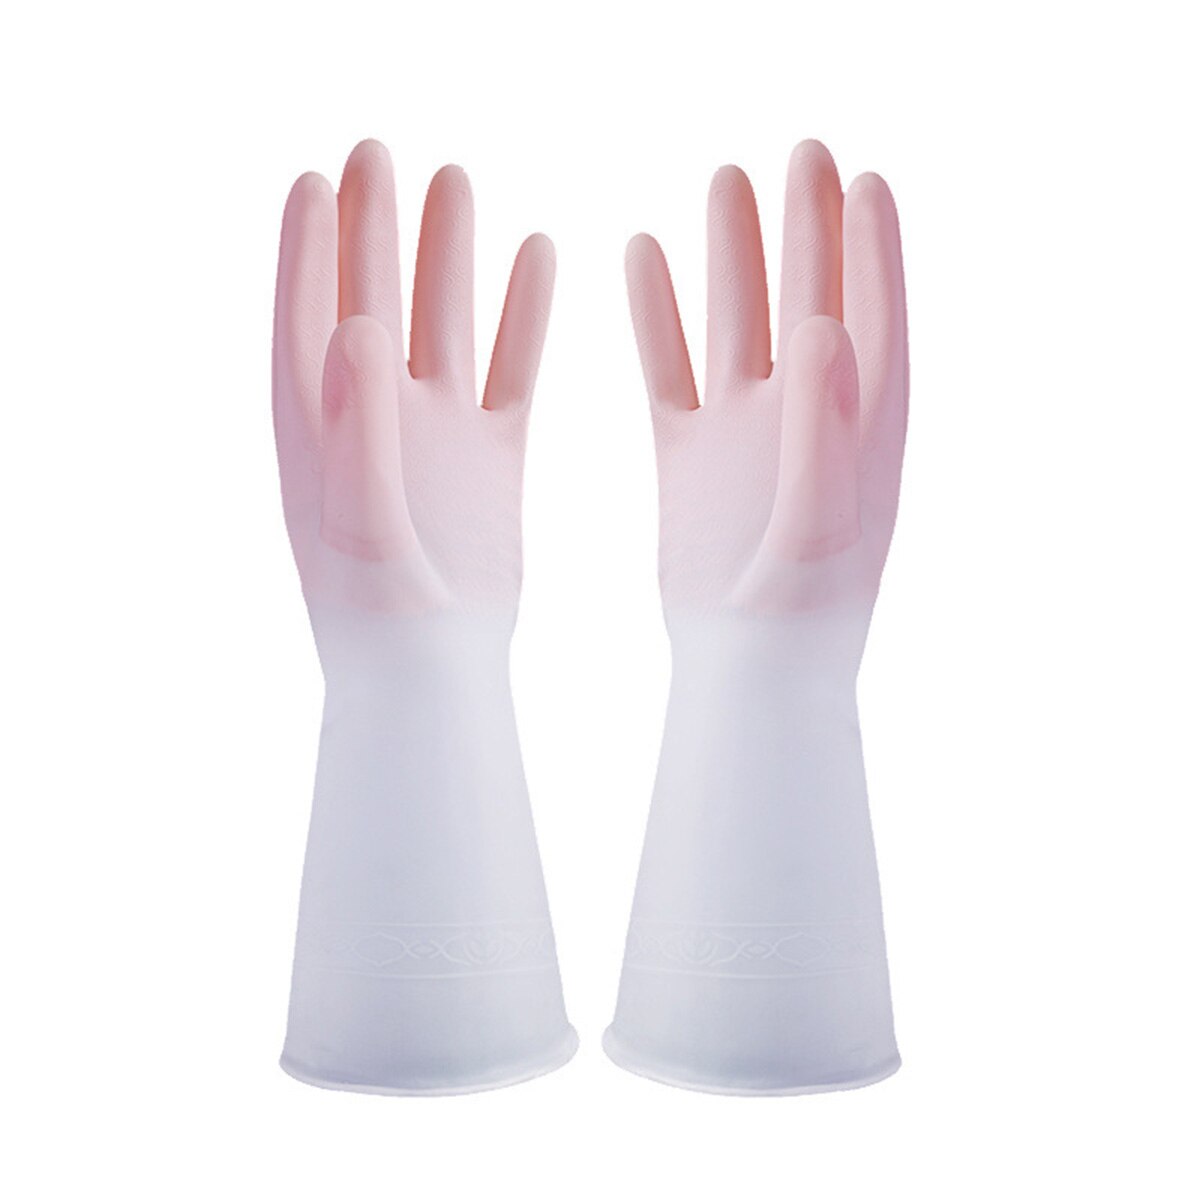 Household Rubber Gloves Thin Non-Toxic Waterproof Gloves Suitable Washing Dishes Clothes